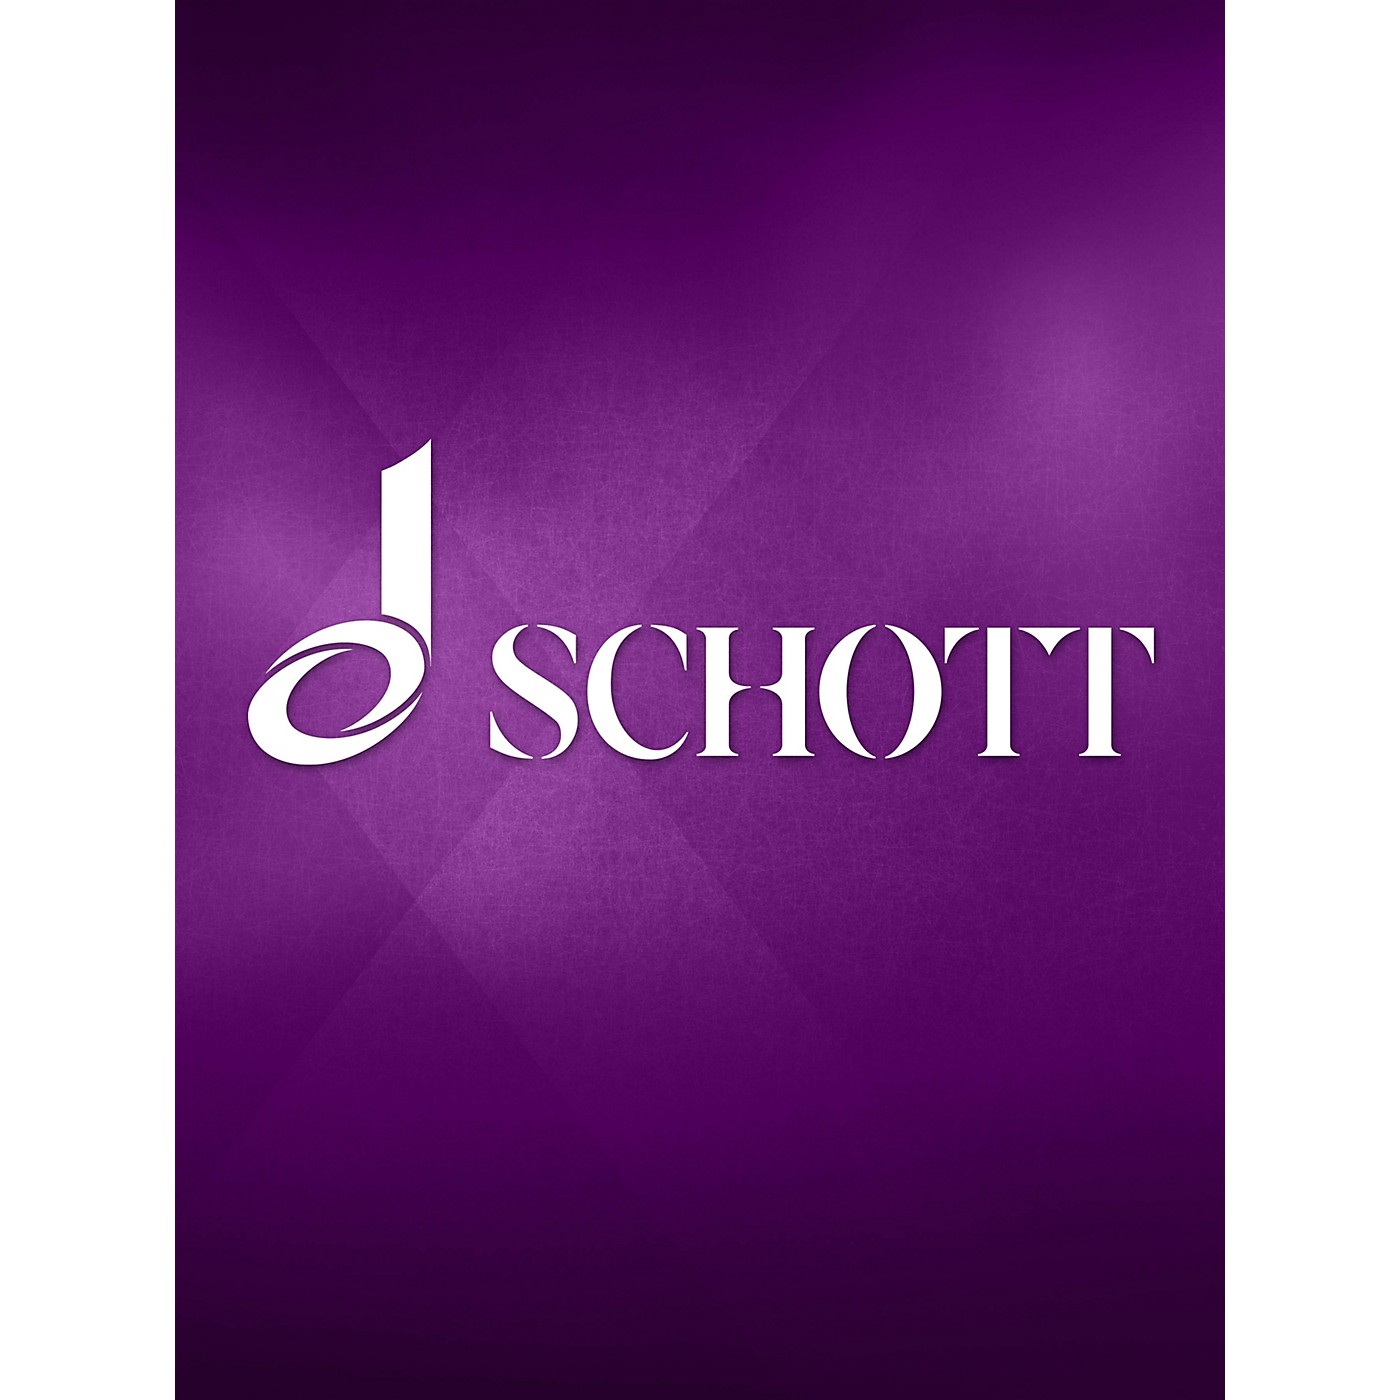 Schott Chor-Express Volume 2 (Choral Score) Composed by Various Arranged by Bernd Frank thumbnail